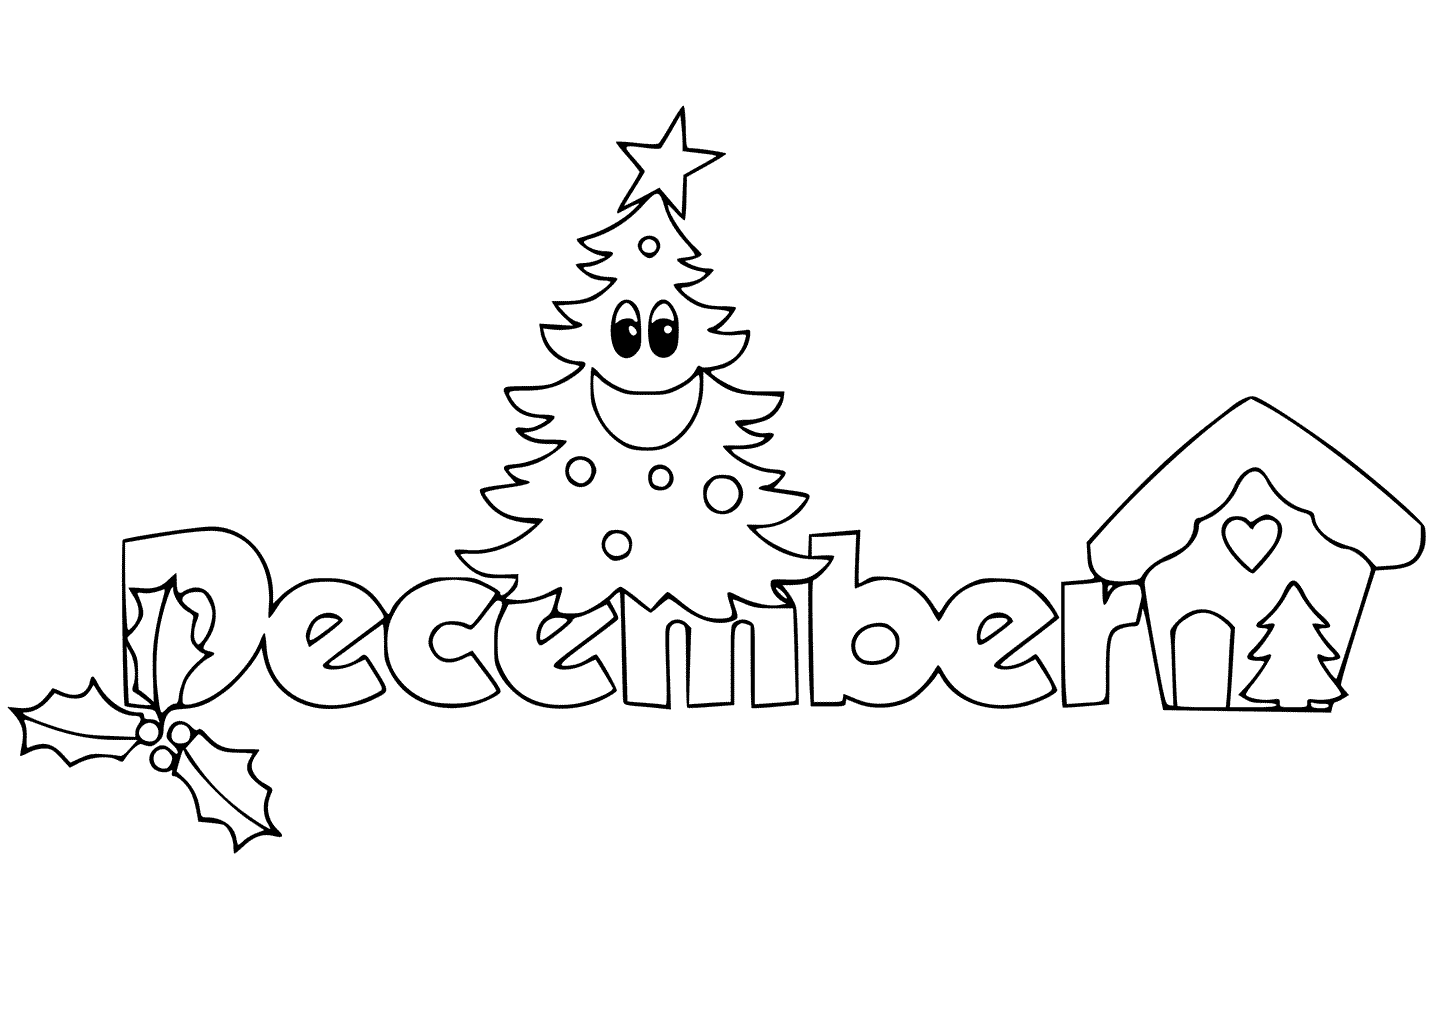 December with Christmas Tree Coloring Page